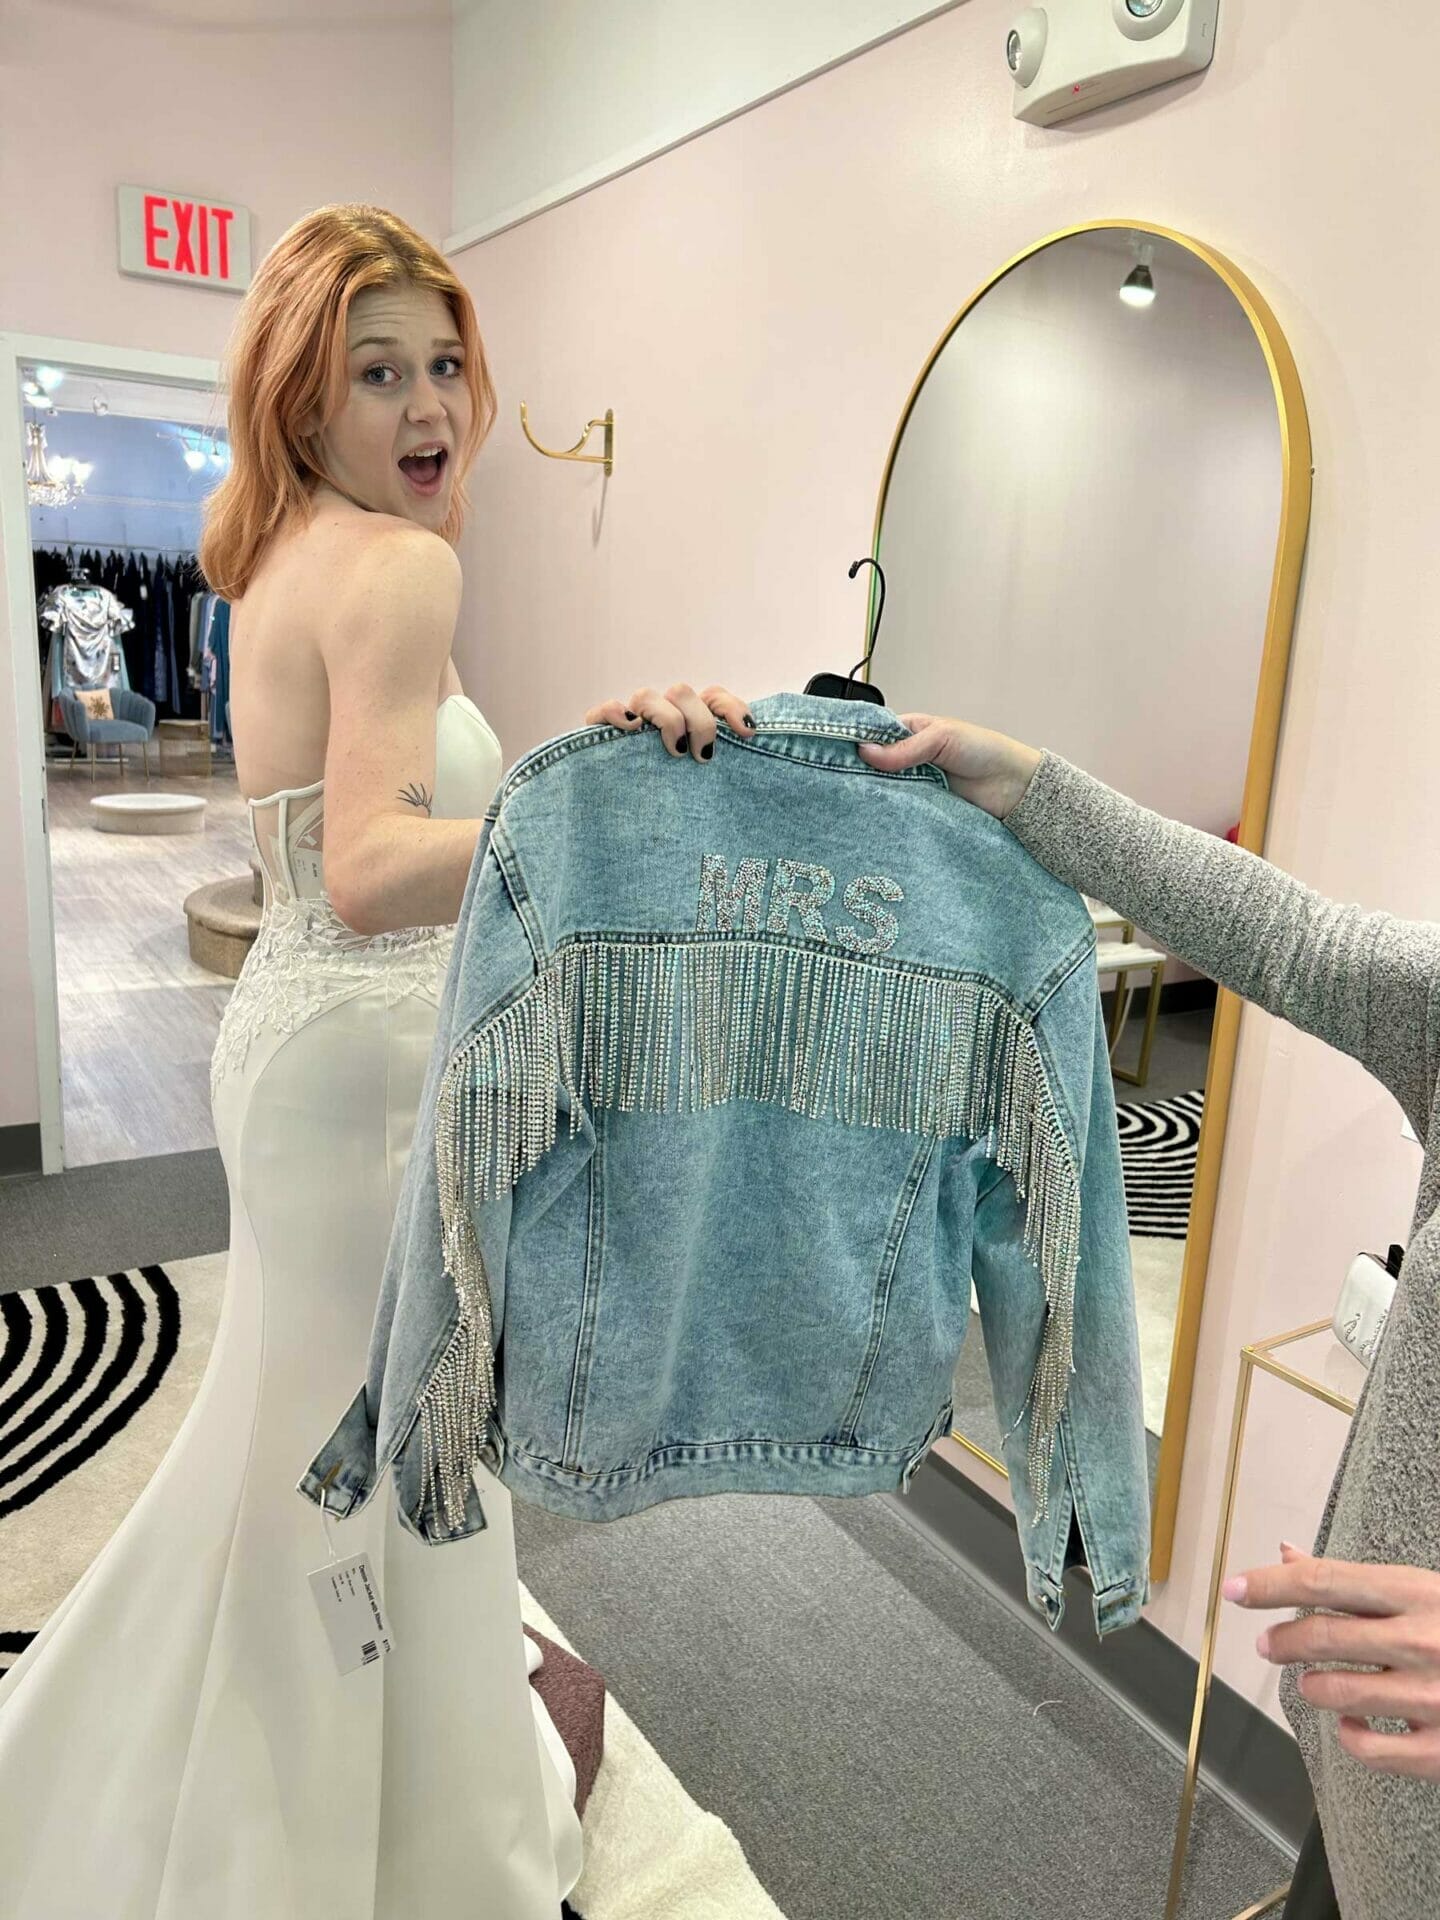 A woman in a wedding dress is looking at a denim jacket in a bridal store.